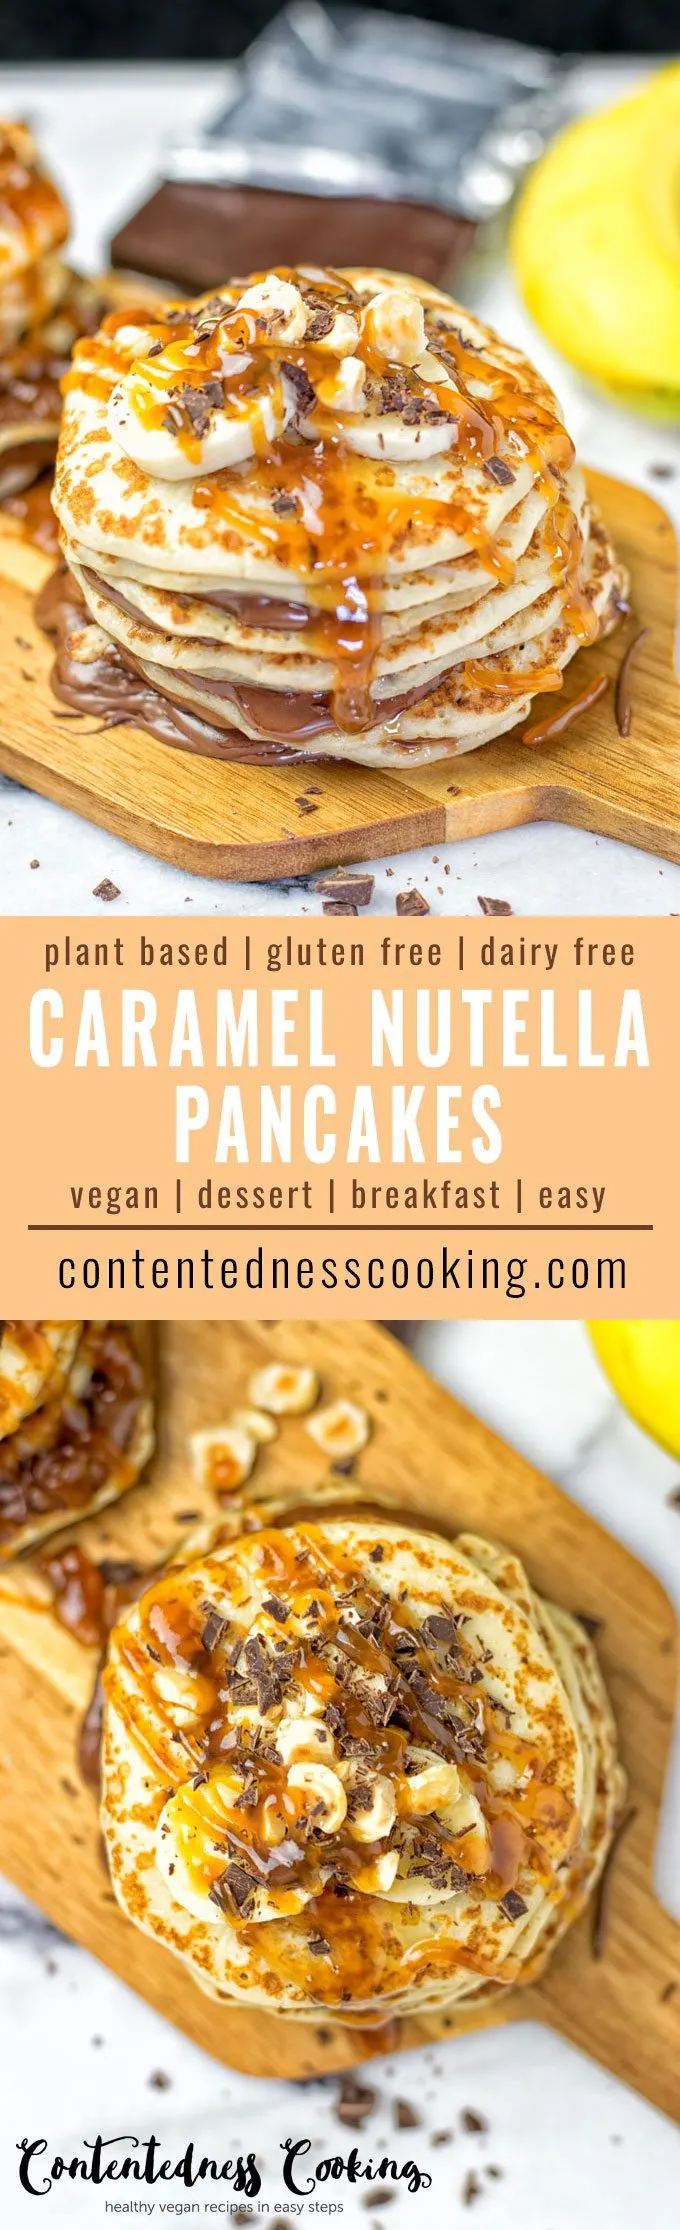 Collage of two pictures of Vegan Caramel Nutella Pancakes with recipe title text.